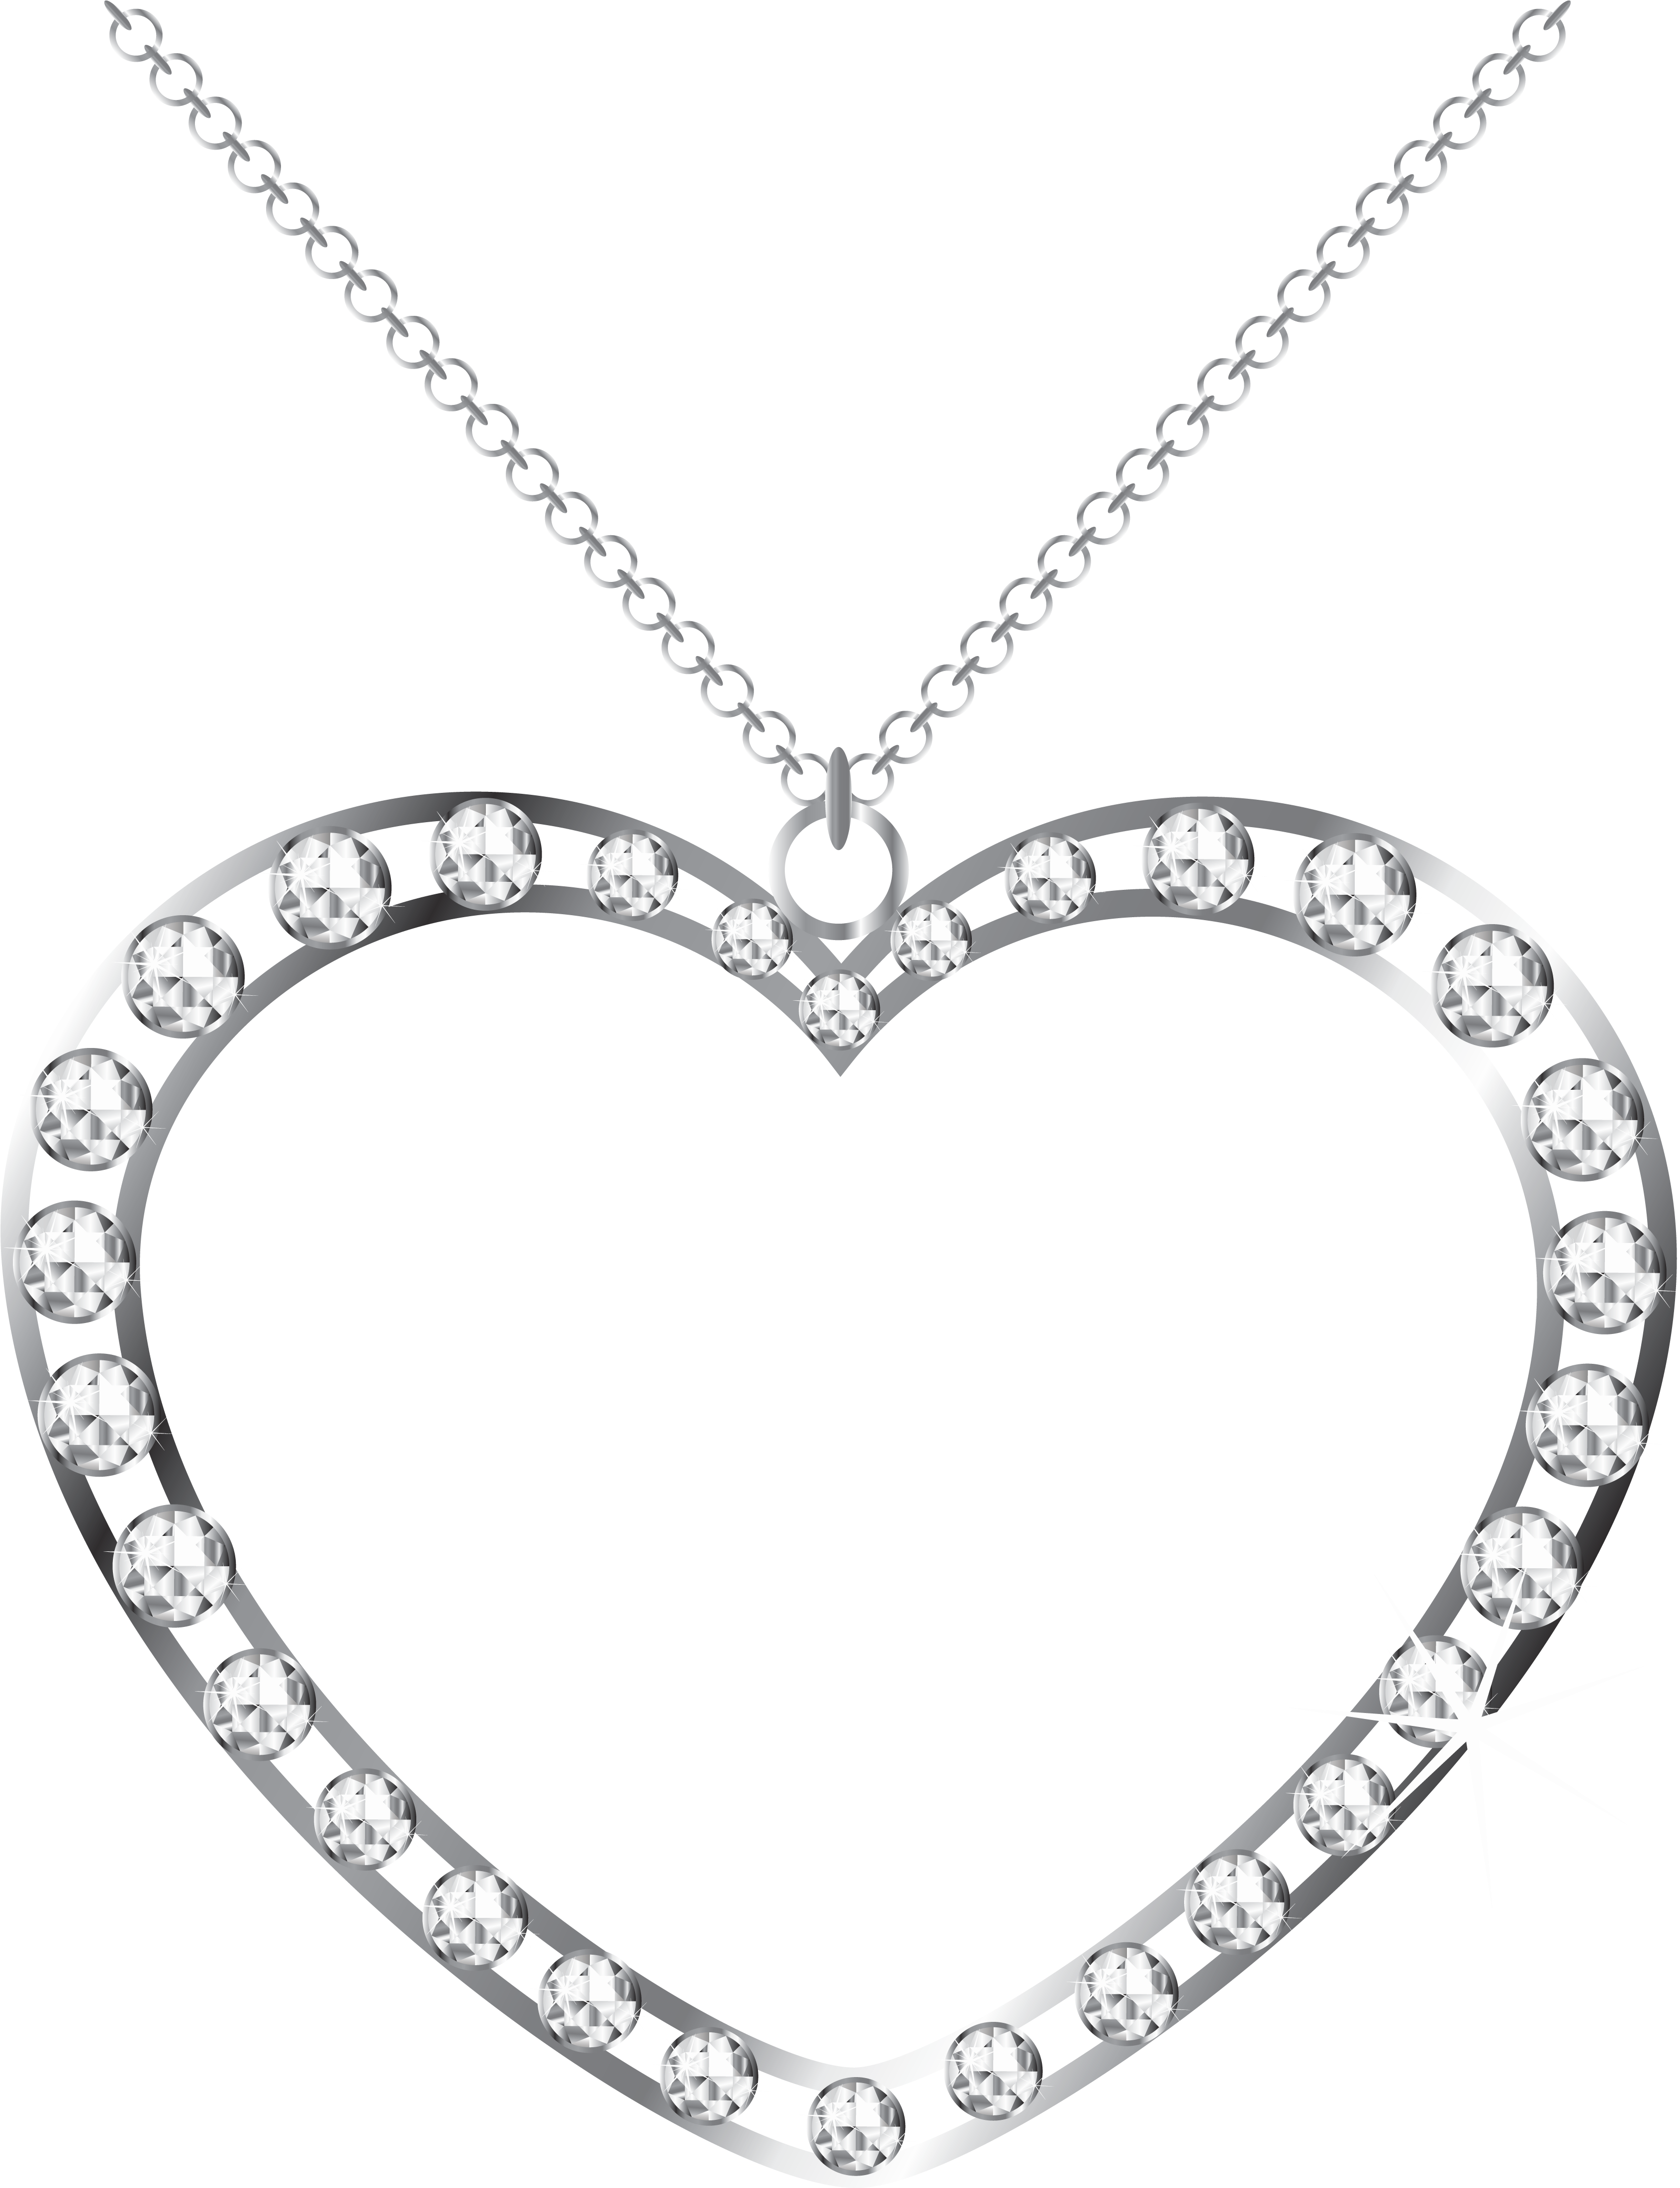 Download Jewelry Clipart Diamond Heart Diamond Heart Necklace Png Png Image With No Background Pngkey Com